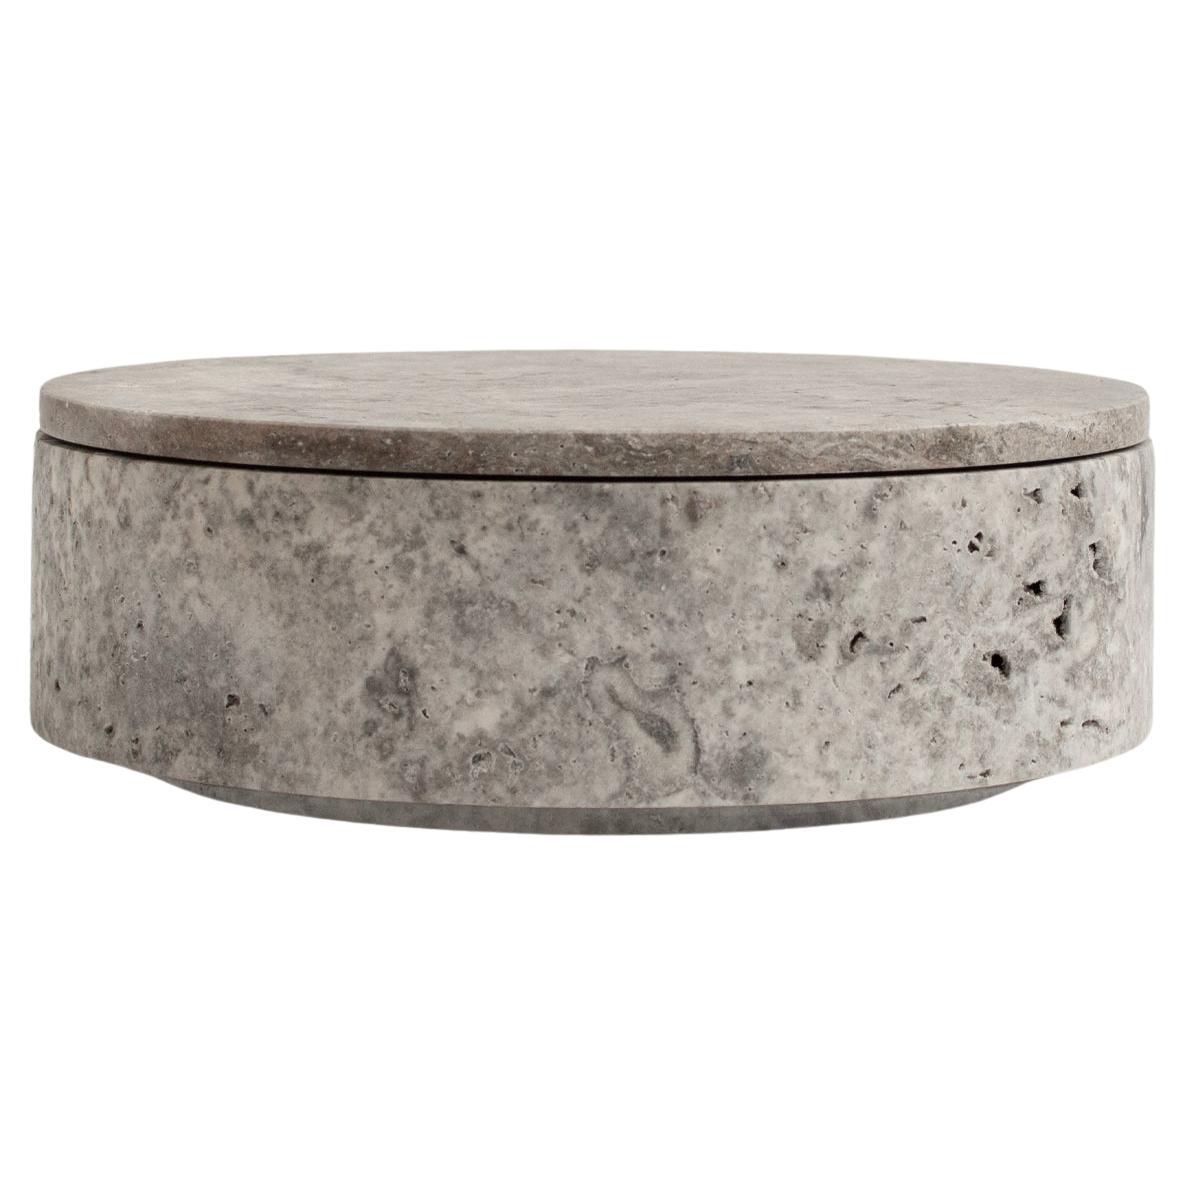 Silver Travertine Cylinder Bowl with Lid